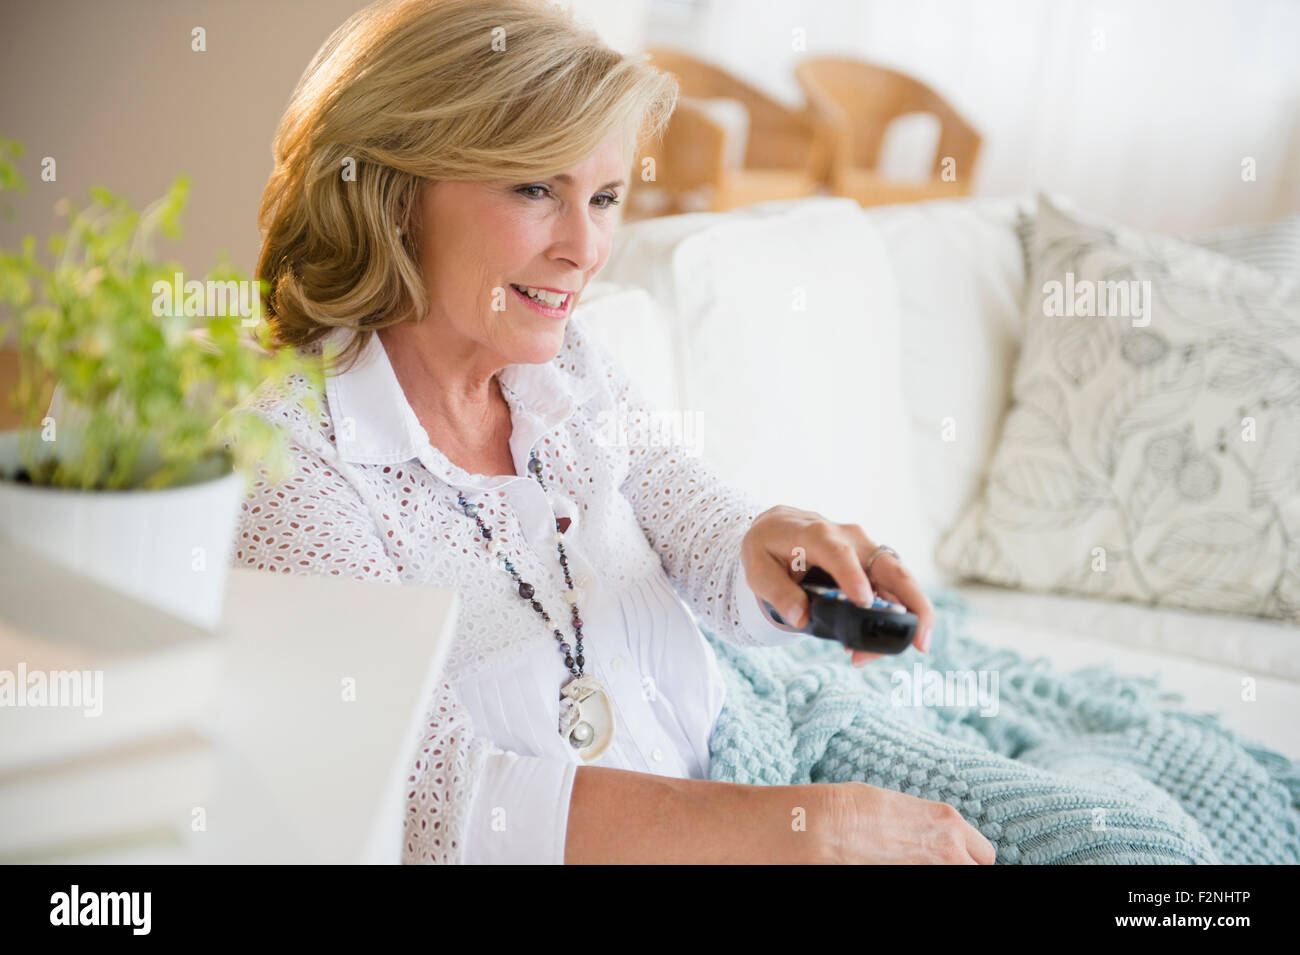 Caucasian woman watching television on sofa Banque D'Images